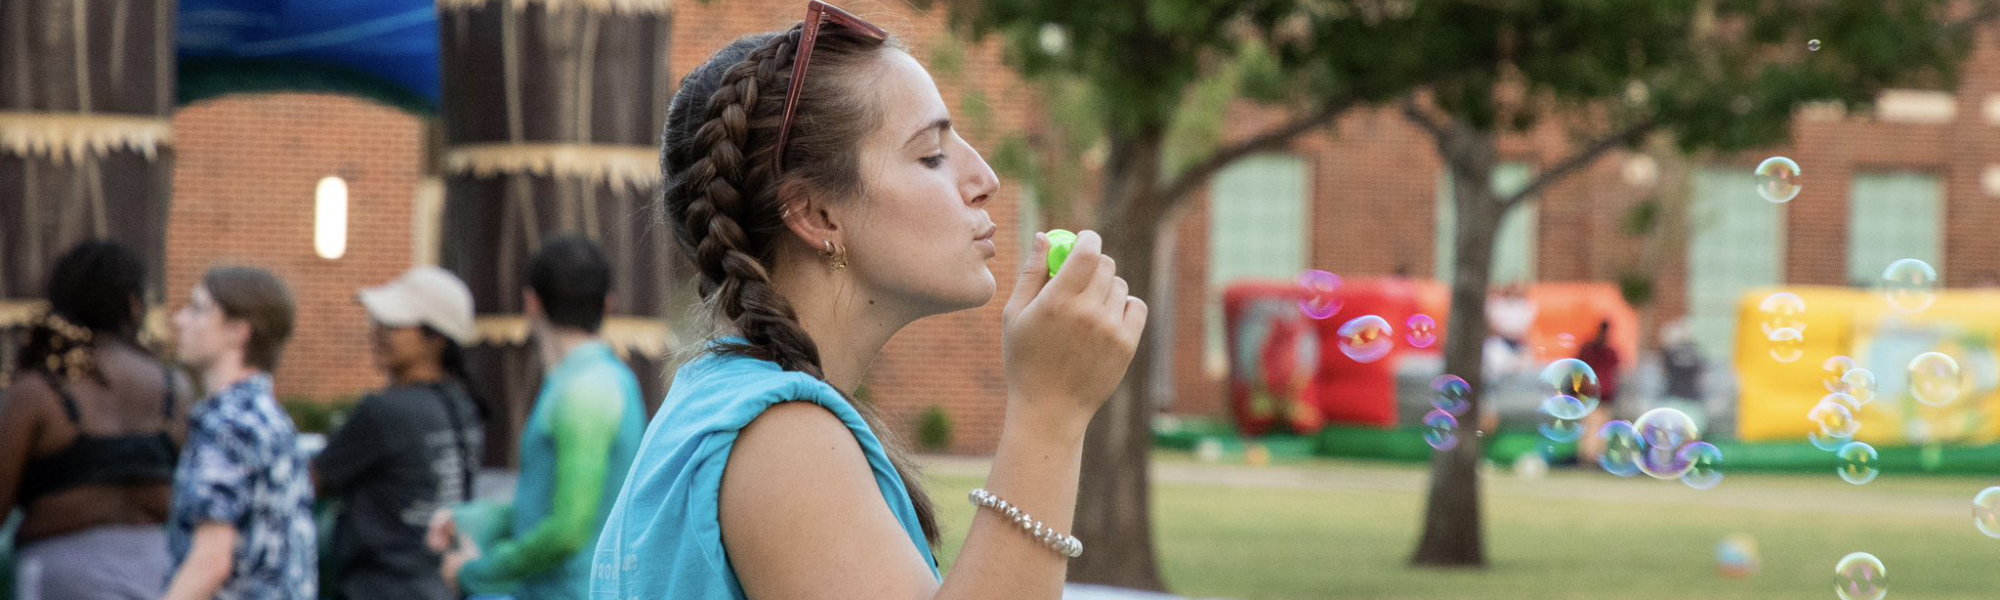 A student blowing bubbles at a summertime event.